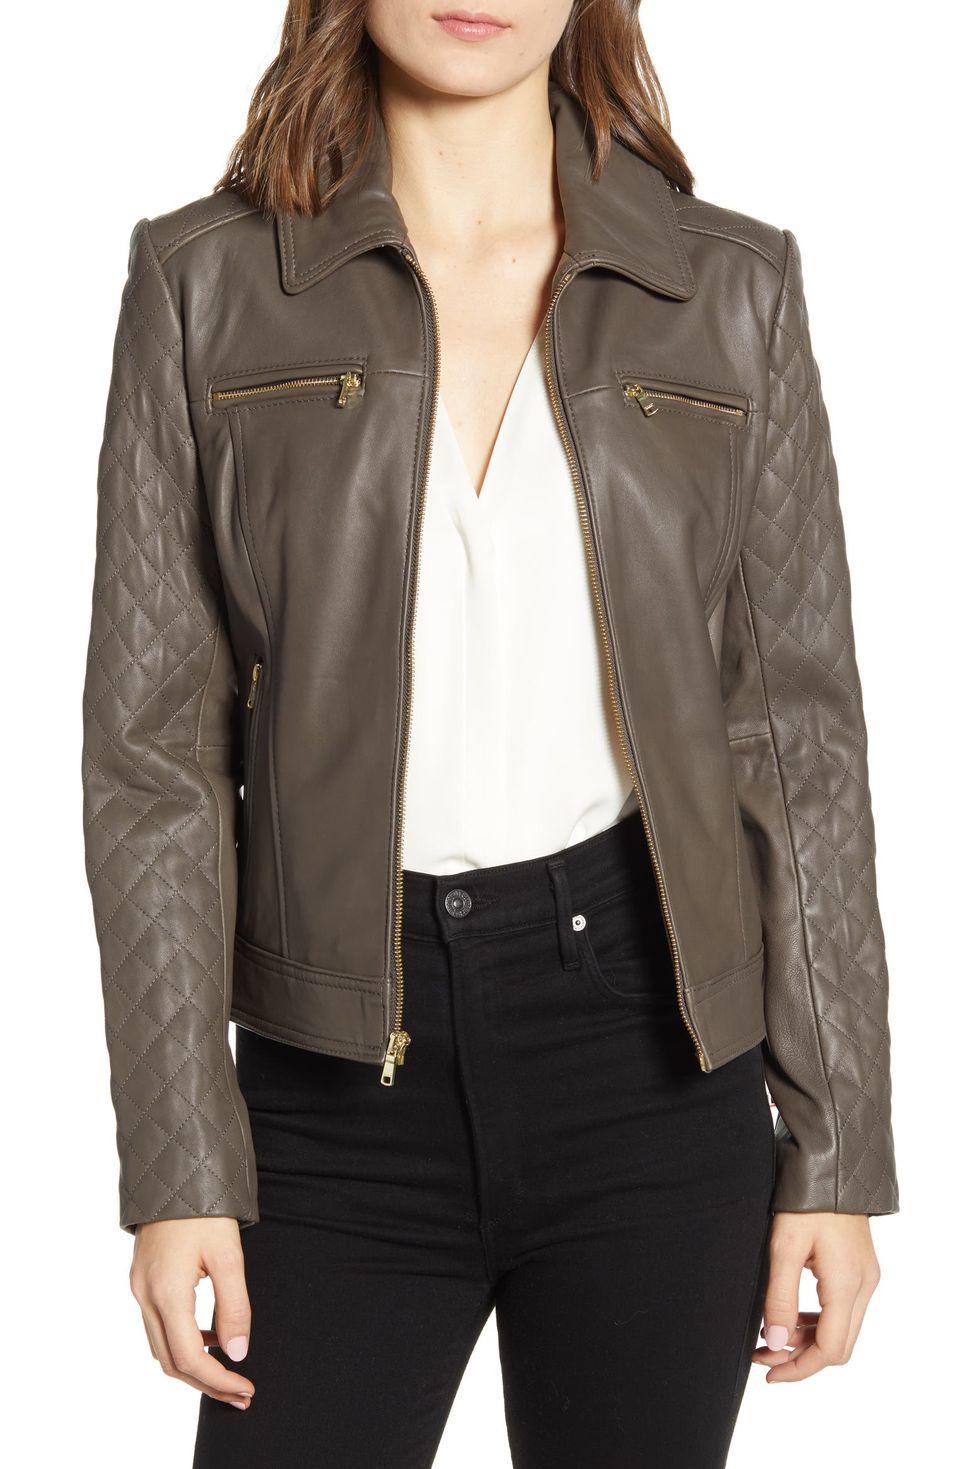 Cole Haan Quilted Lambskin Leather Jacket